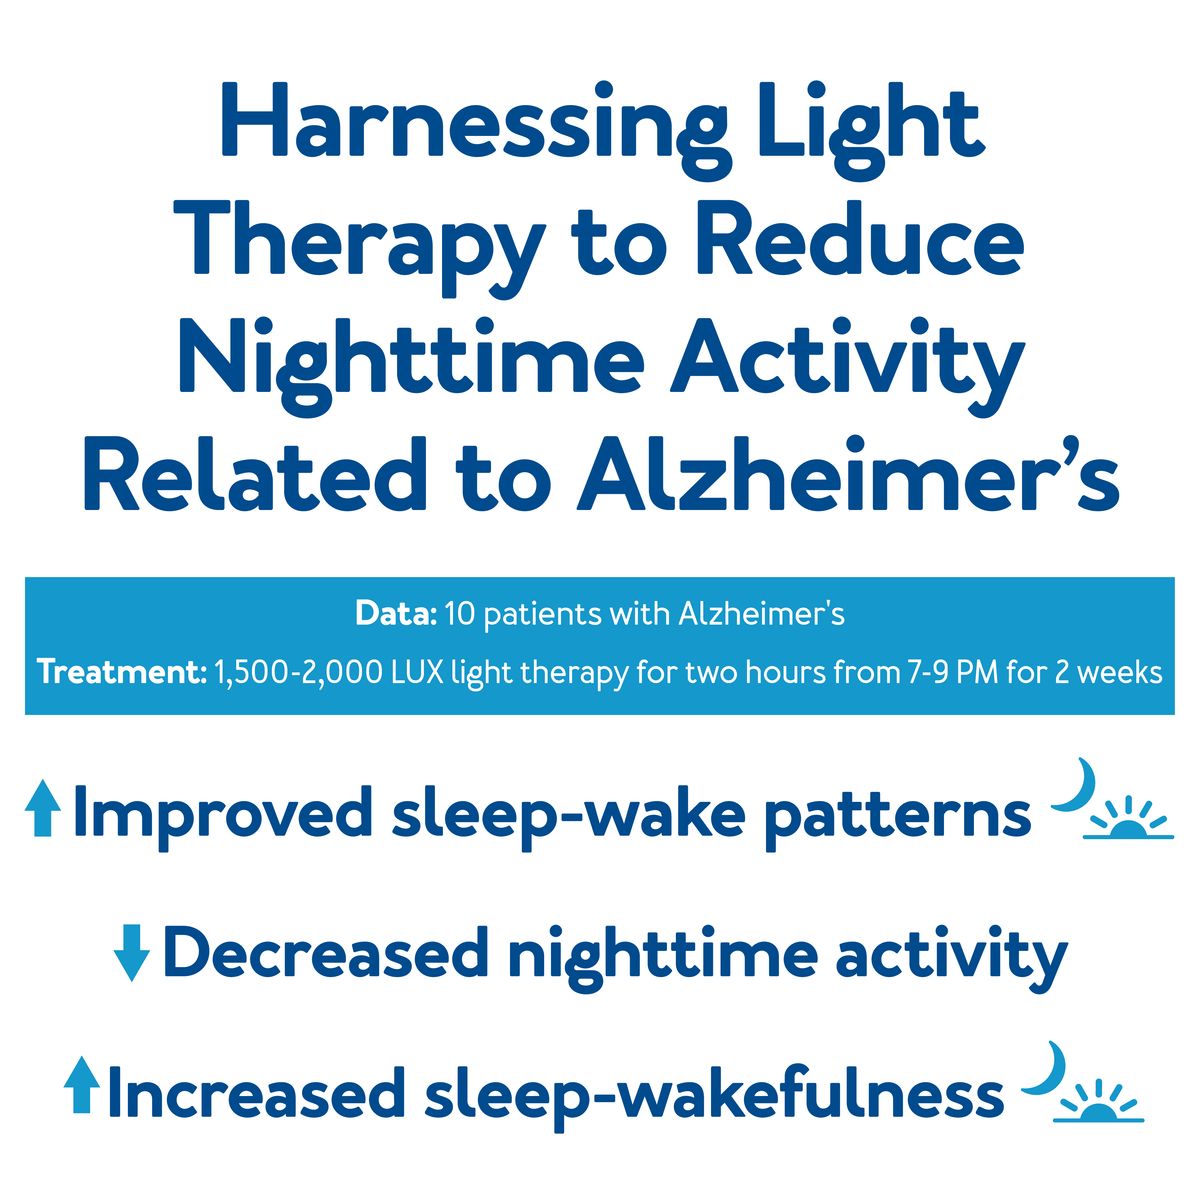 Harnessing Light Therapy to Reduce Nighttime Activity, further details are provided below.